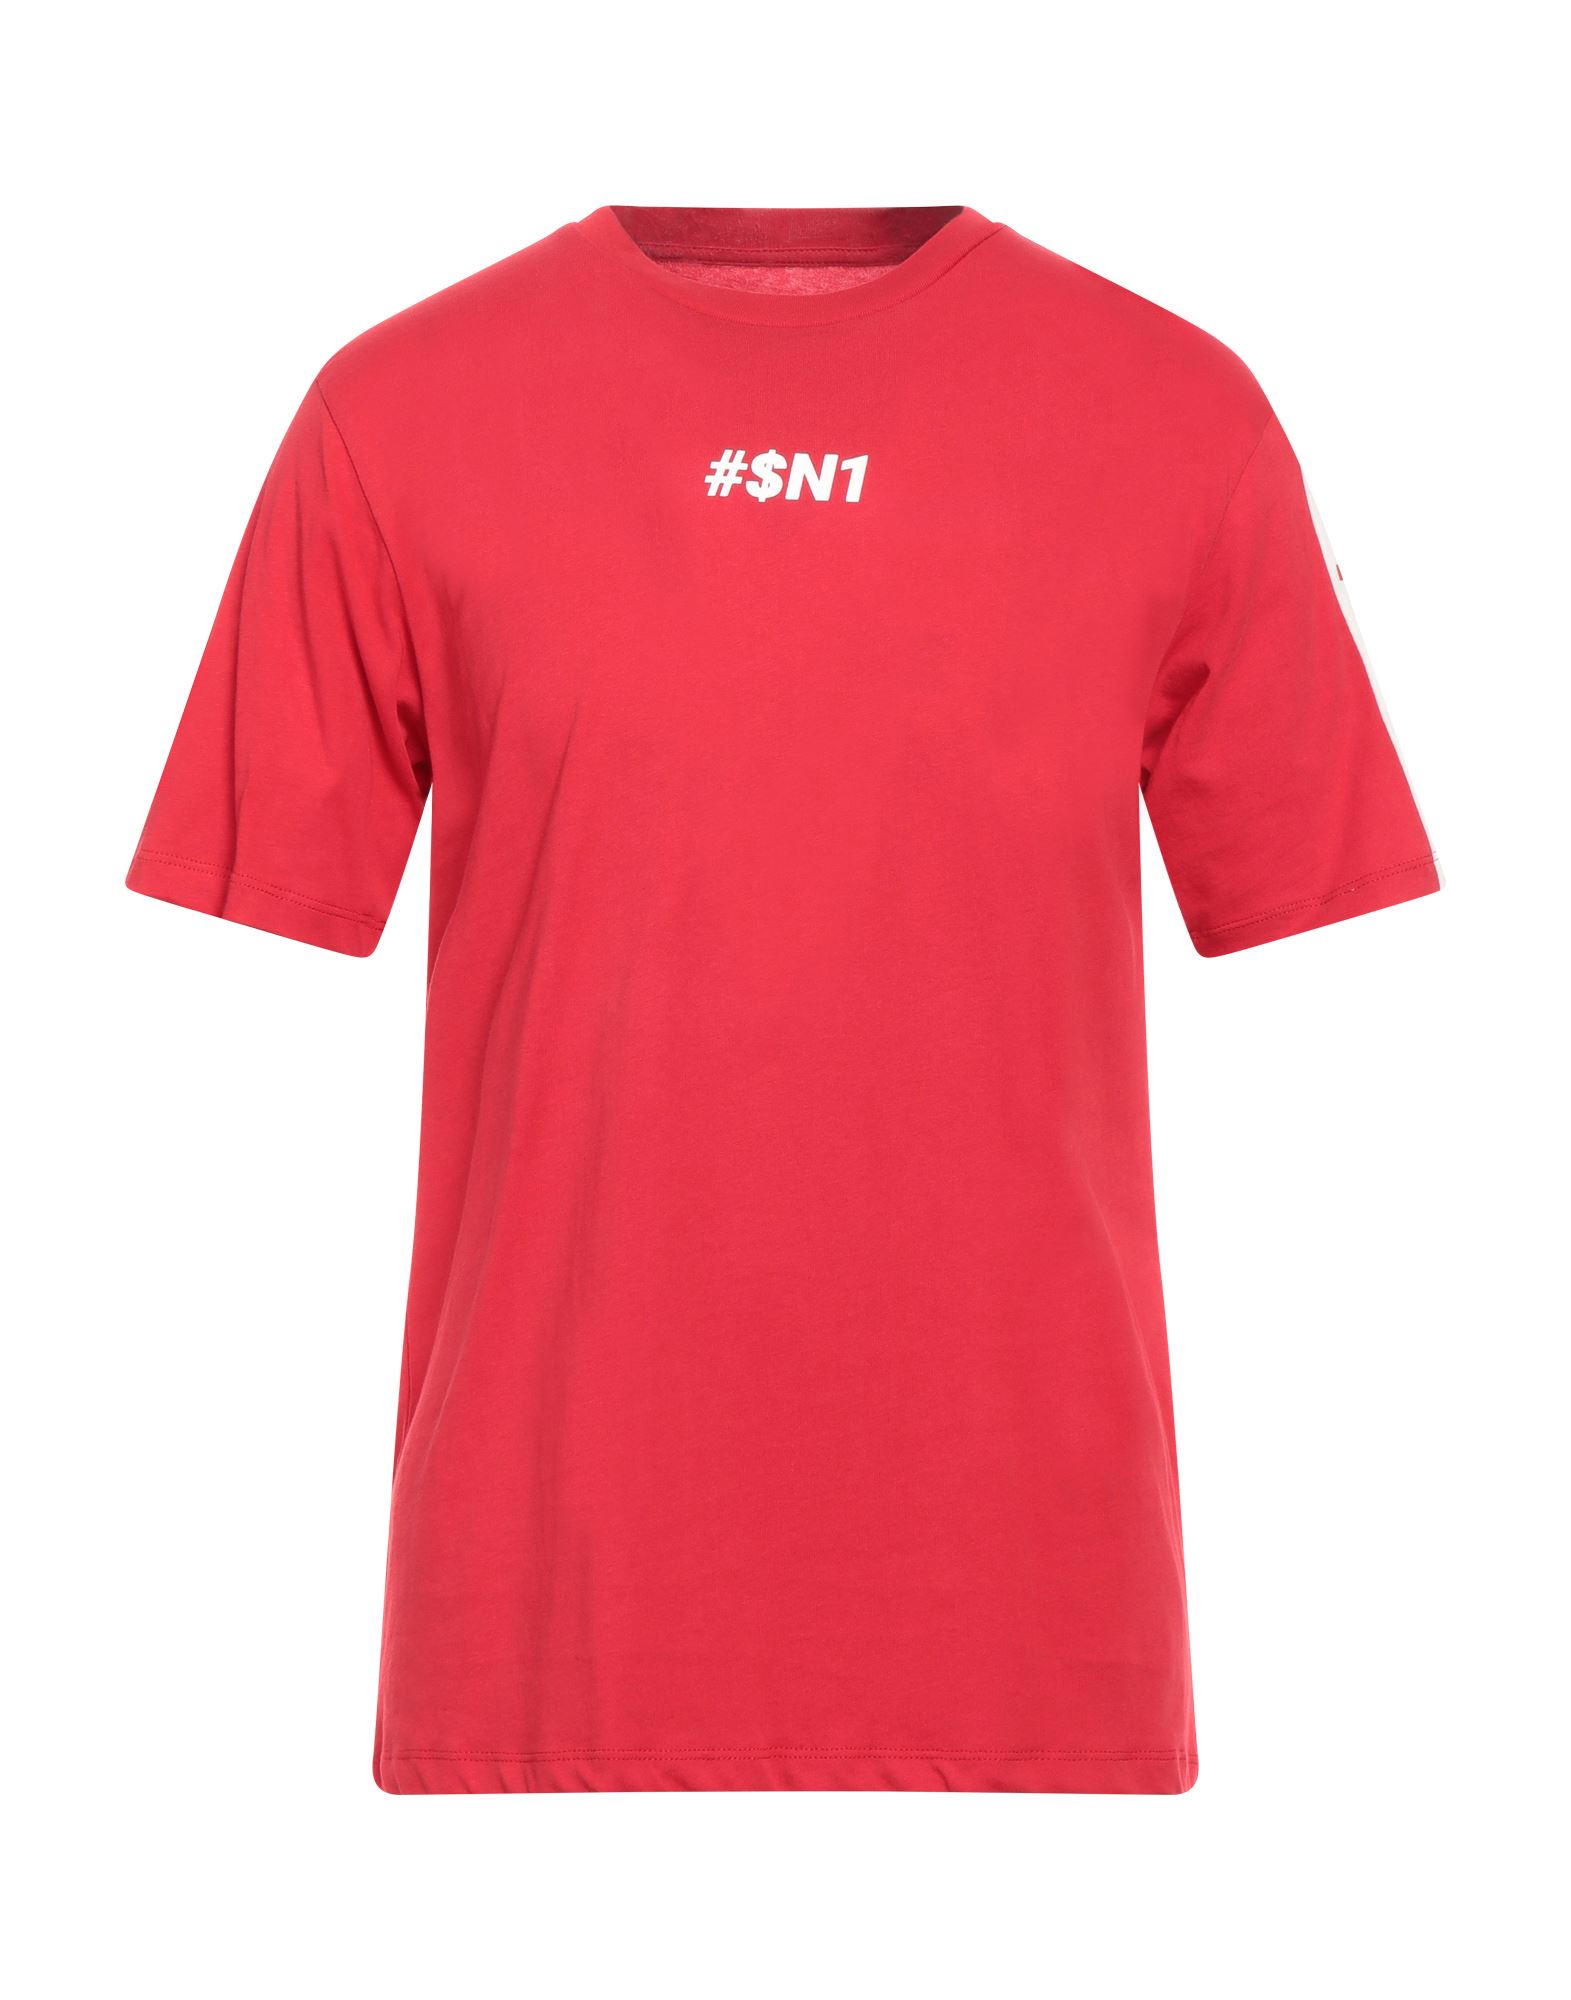 Sn1 T-shirts In Red